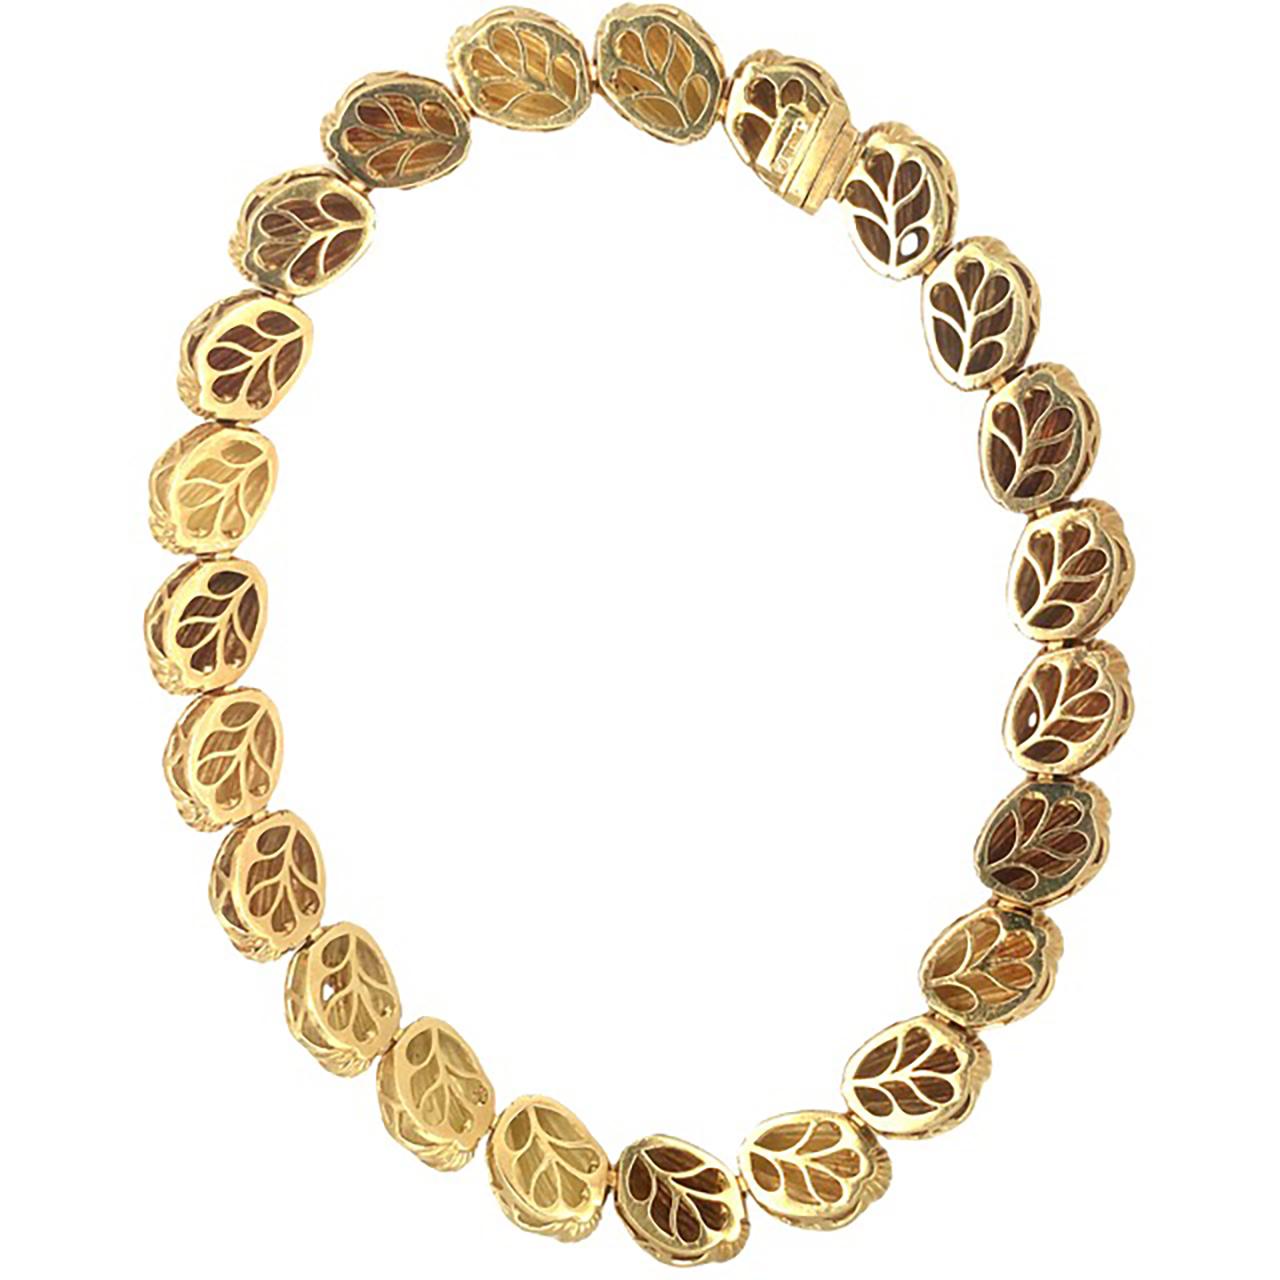 One shell motif link 18k yellow gold necklace by Hammerman Brothers featuring twenty-three ribbed and high polish gold links measuring 15 mm. wide and 12 mm. tall. Circa 1960s.

Impressive, gleaming, weighty.

Metal: 18K yellow gold
Circa: